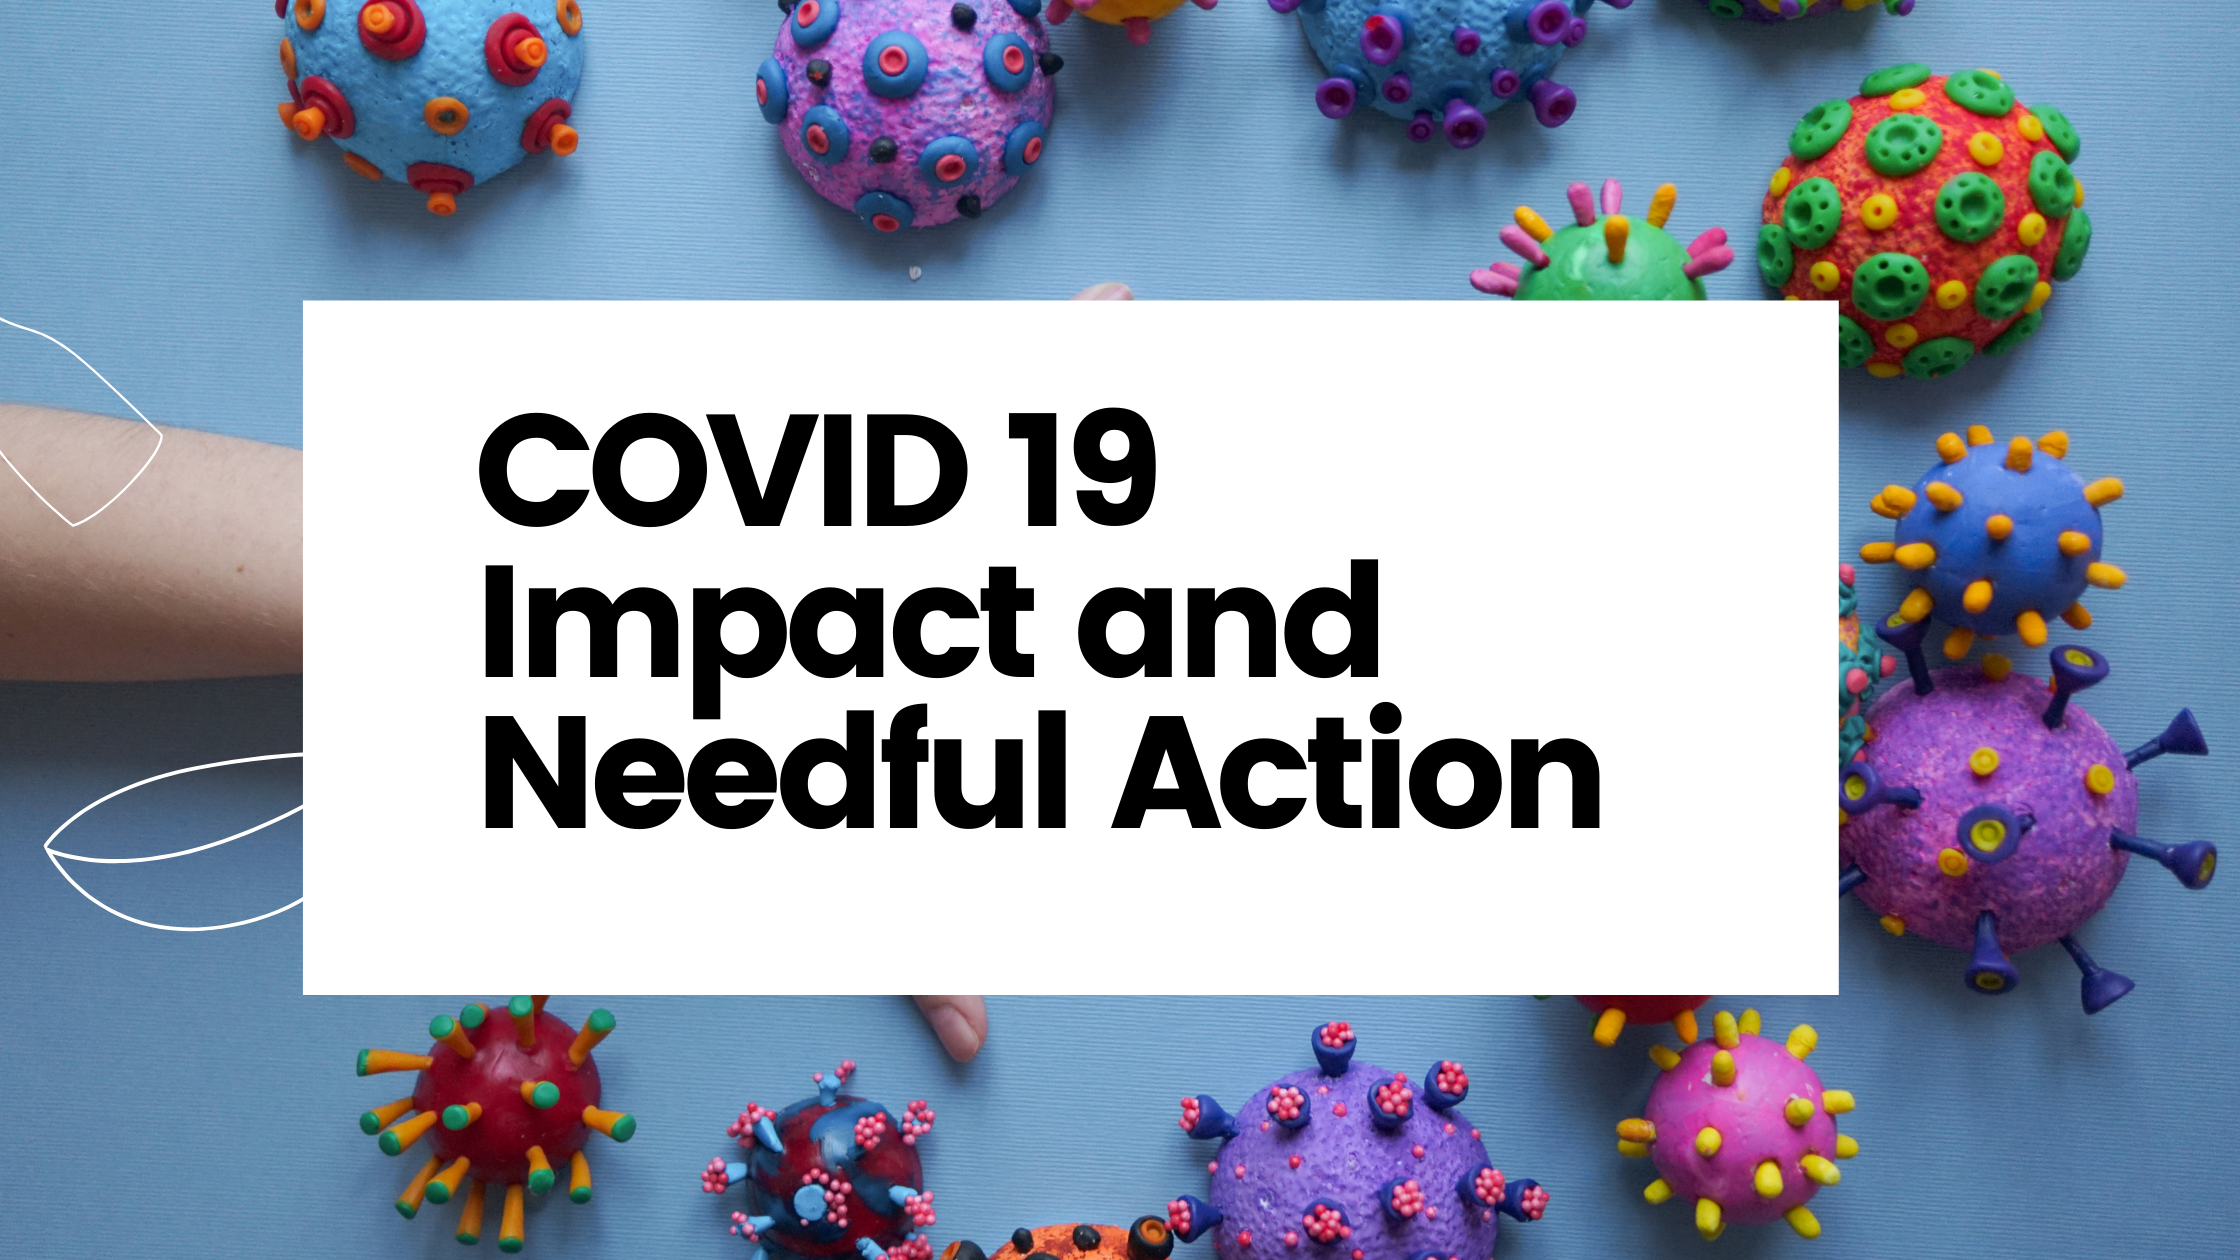 Title of policy brief and background image of covid-19 virus